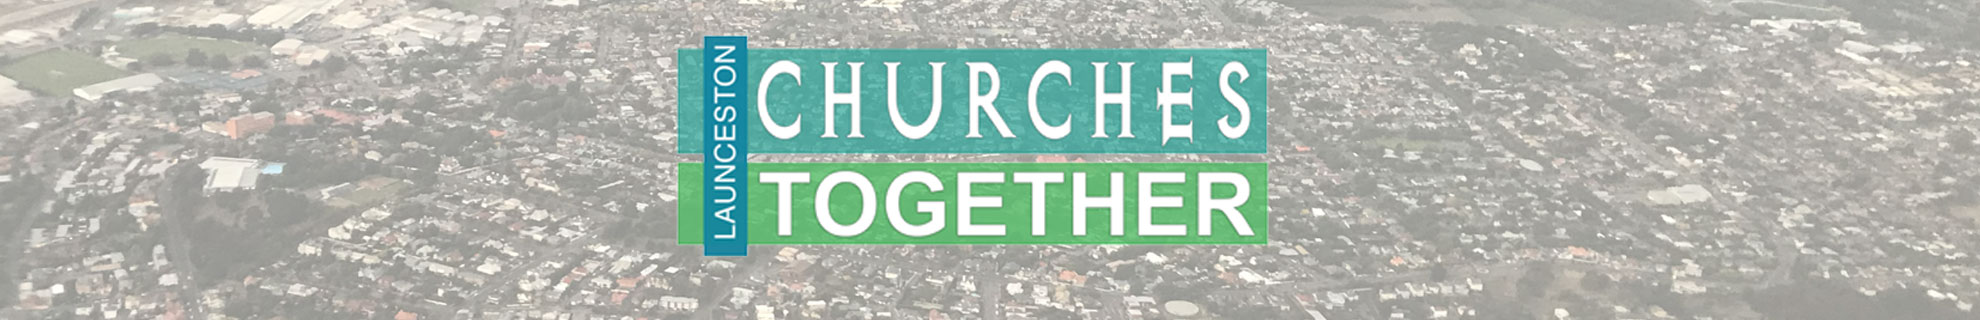 LAUNCESTON CHURCHES TOGETHER  -  A COLLABORATION OF THE CHURCHES OF GREATER LAUNCESTON